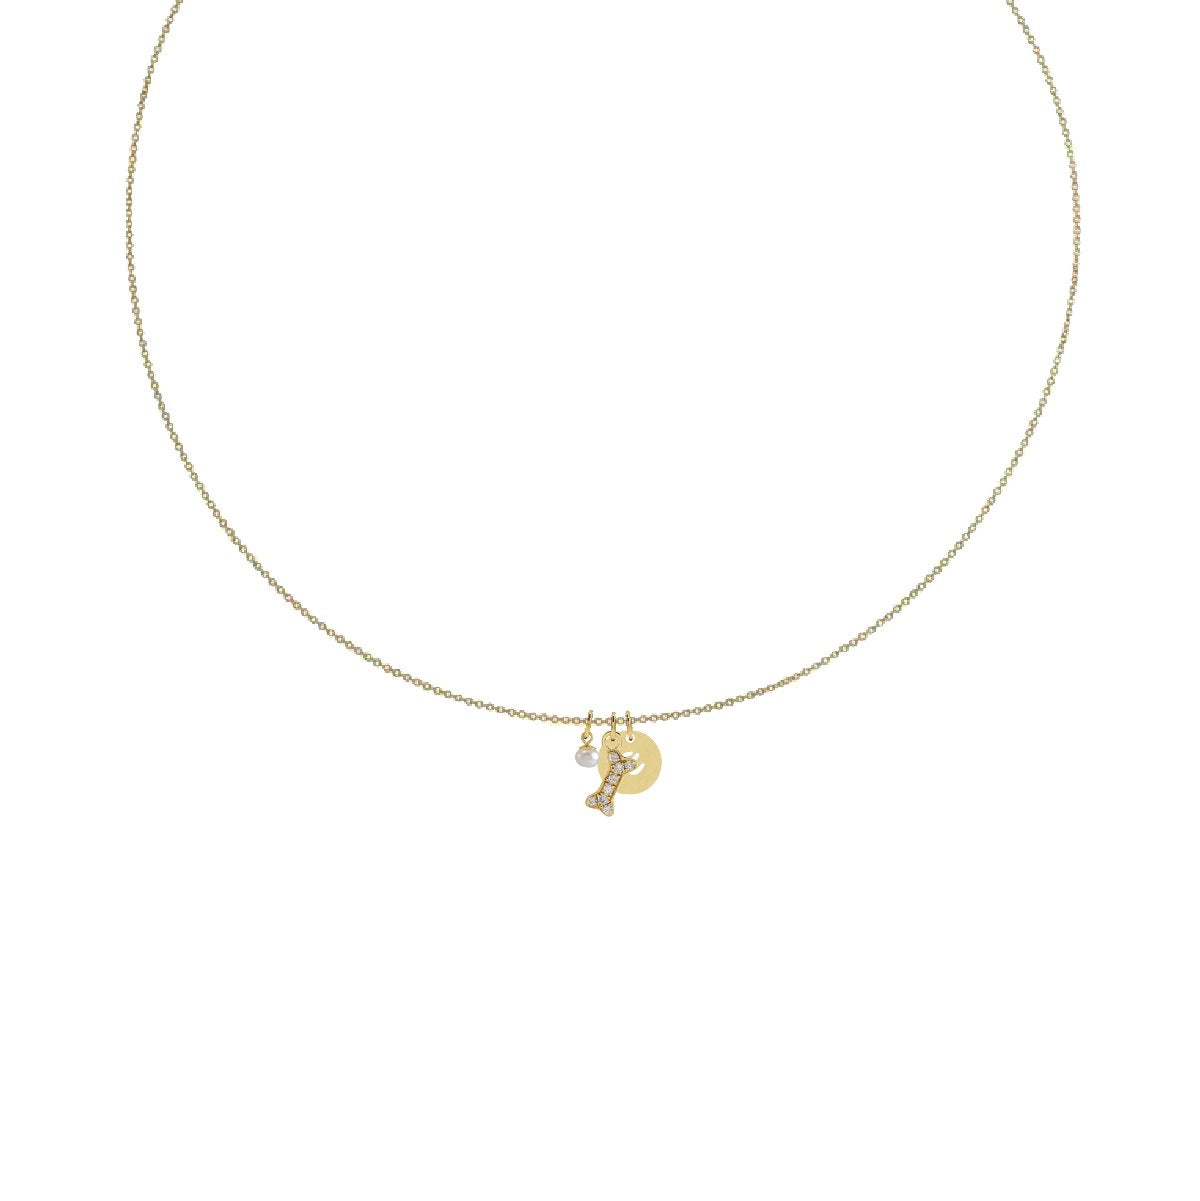 Charm Collection - For the Dog Lover Robyn Canady Charm + 14K Gold Filled Chain Add a Pearl and Initial (put initial selection in notes at checkout) 